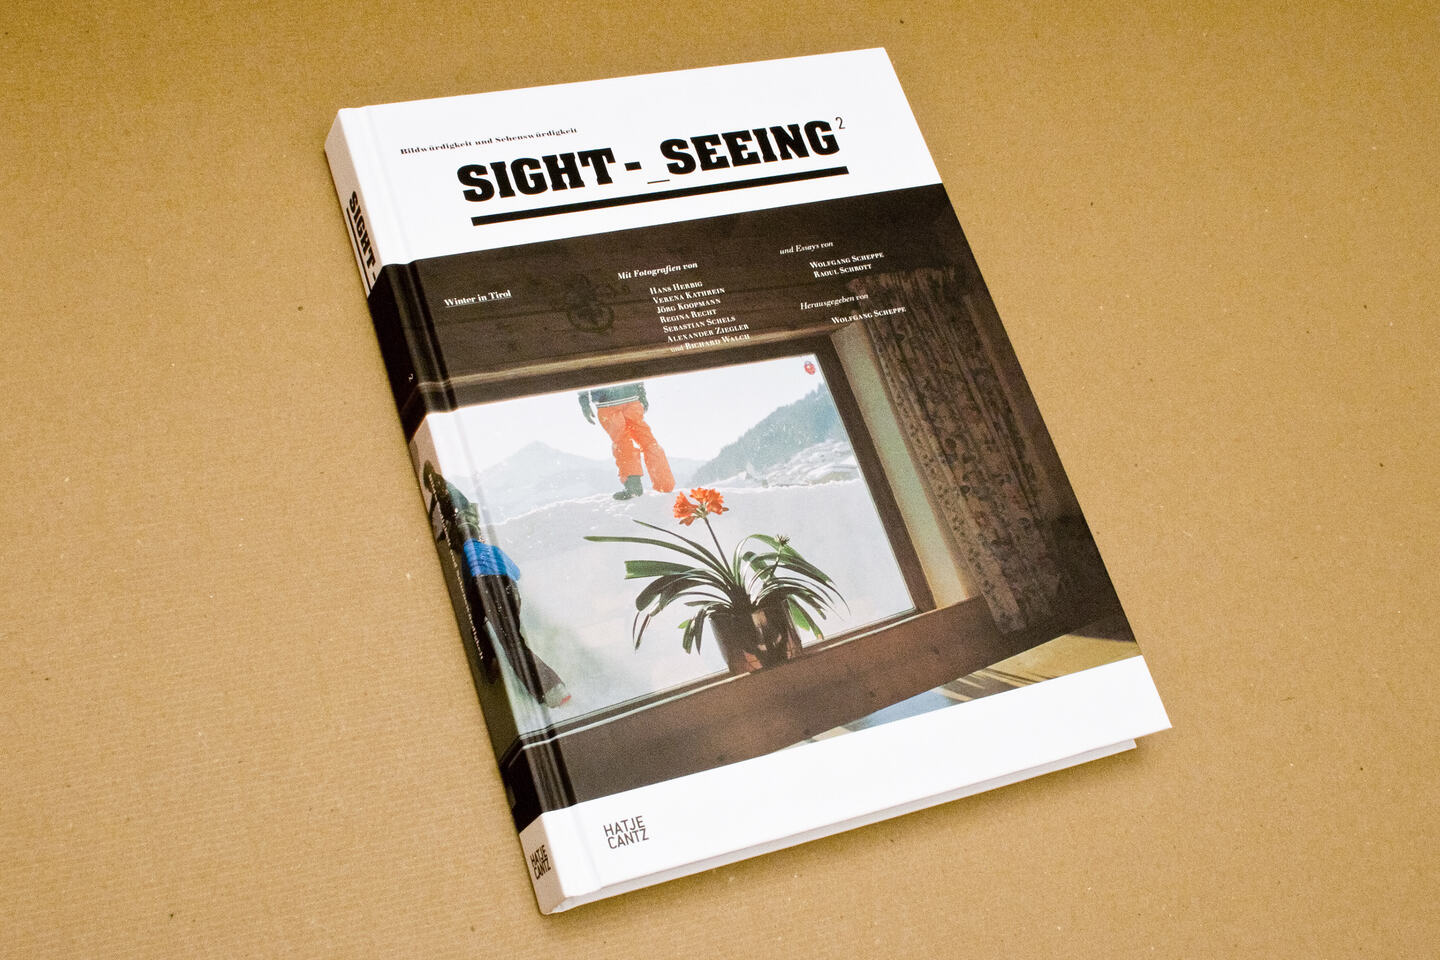 
      The cover of the book Sight-_Seeing 2.
      